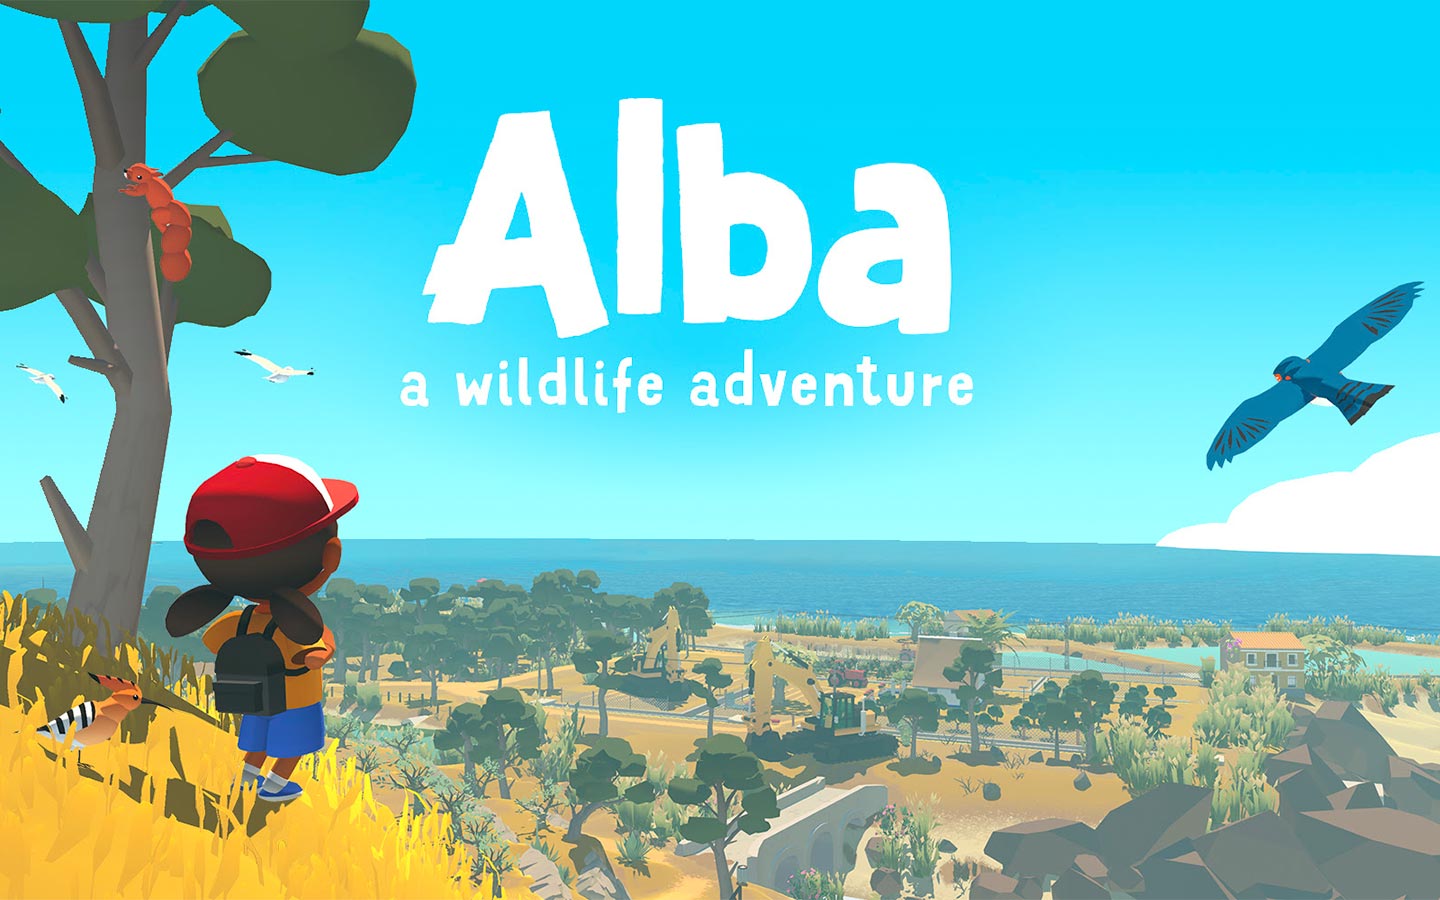 Alba: A Wildlife Adventure, an open world adventure game developed by Ustwo Games